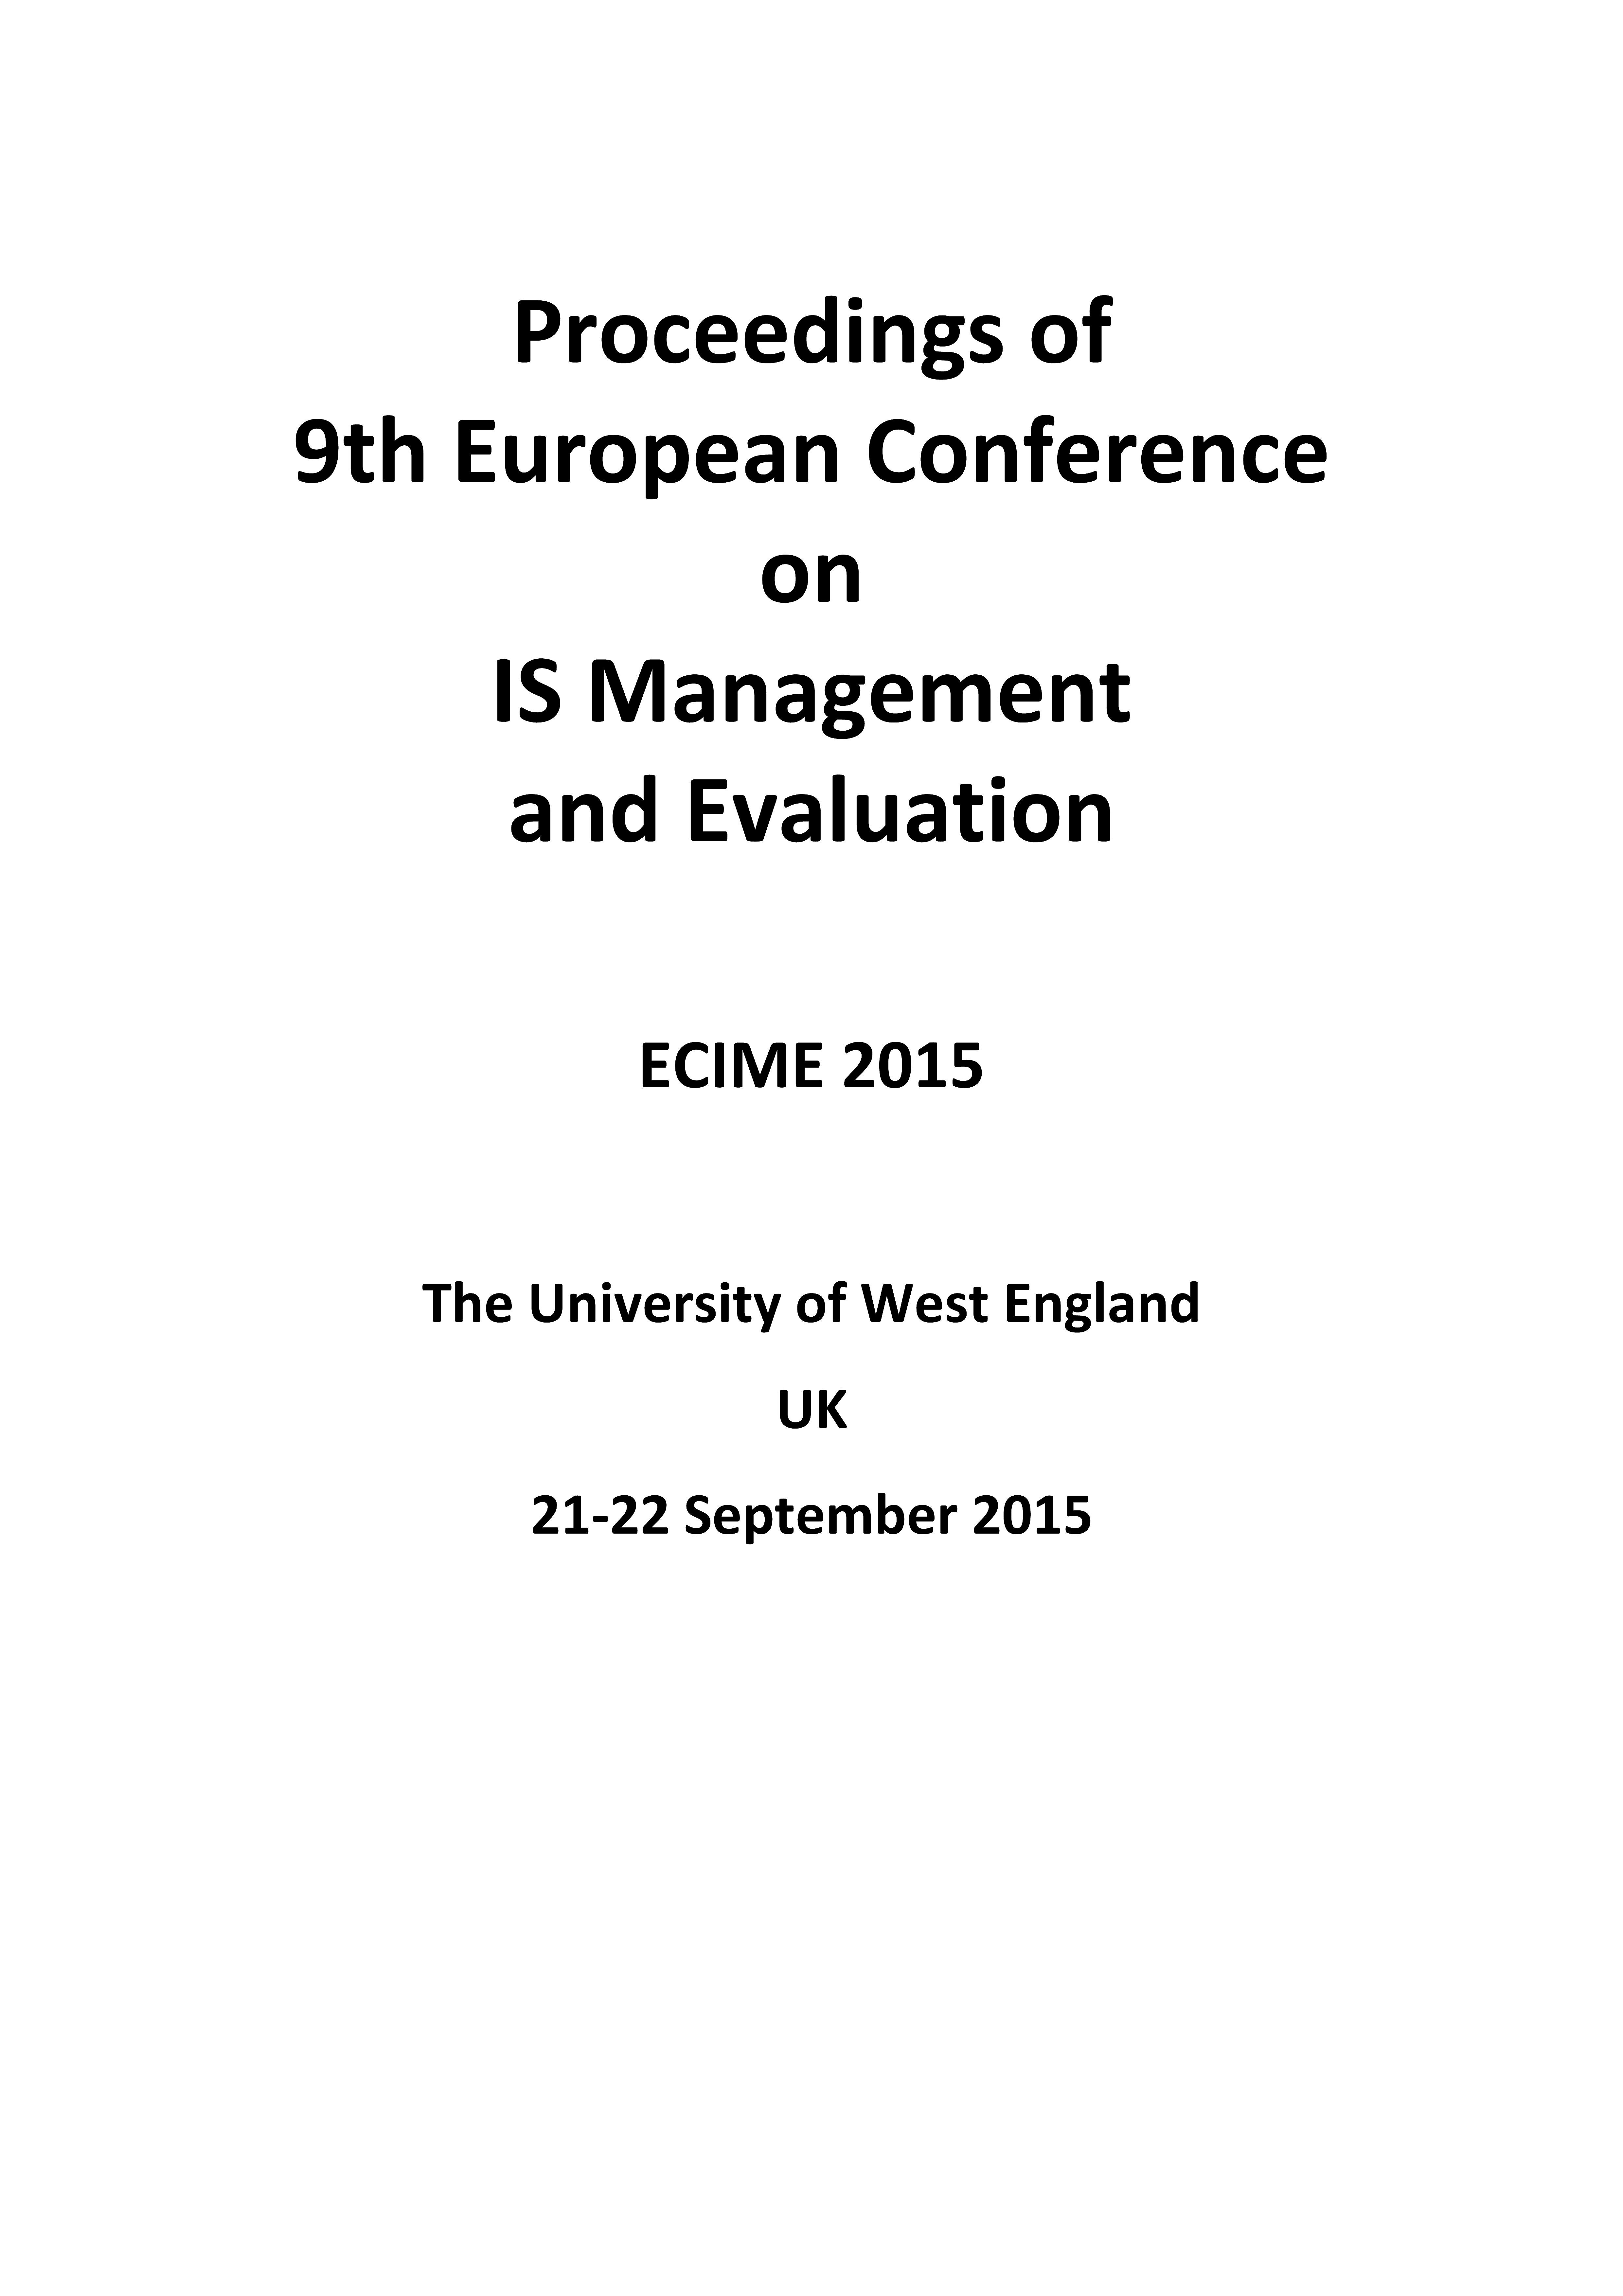 Proceedings of the 9th European Conference on Information Management and Evaluation ECIME 2015